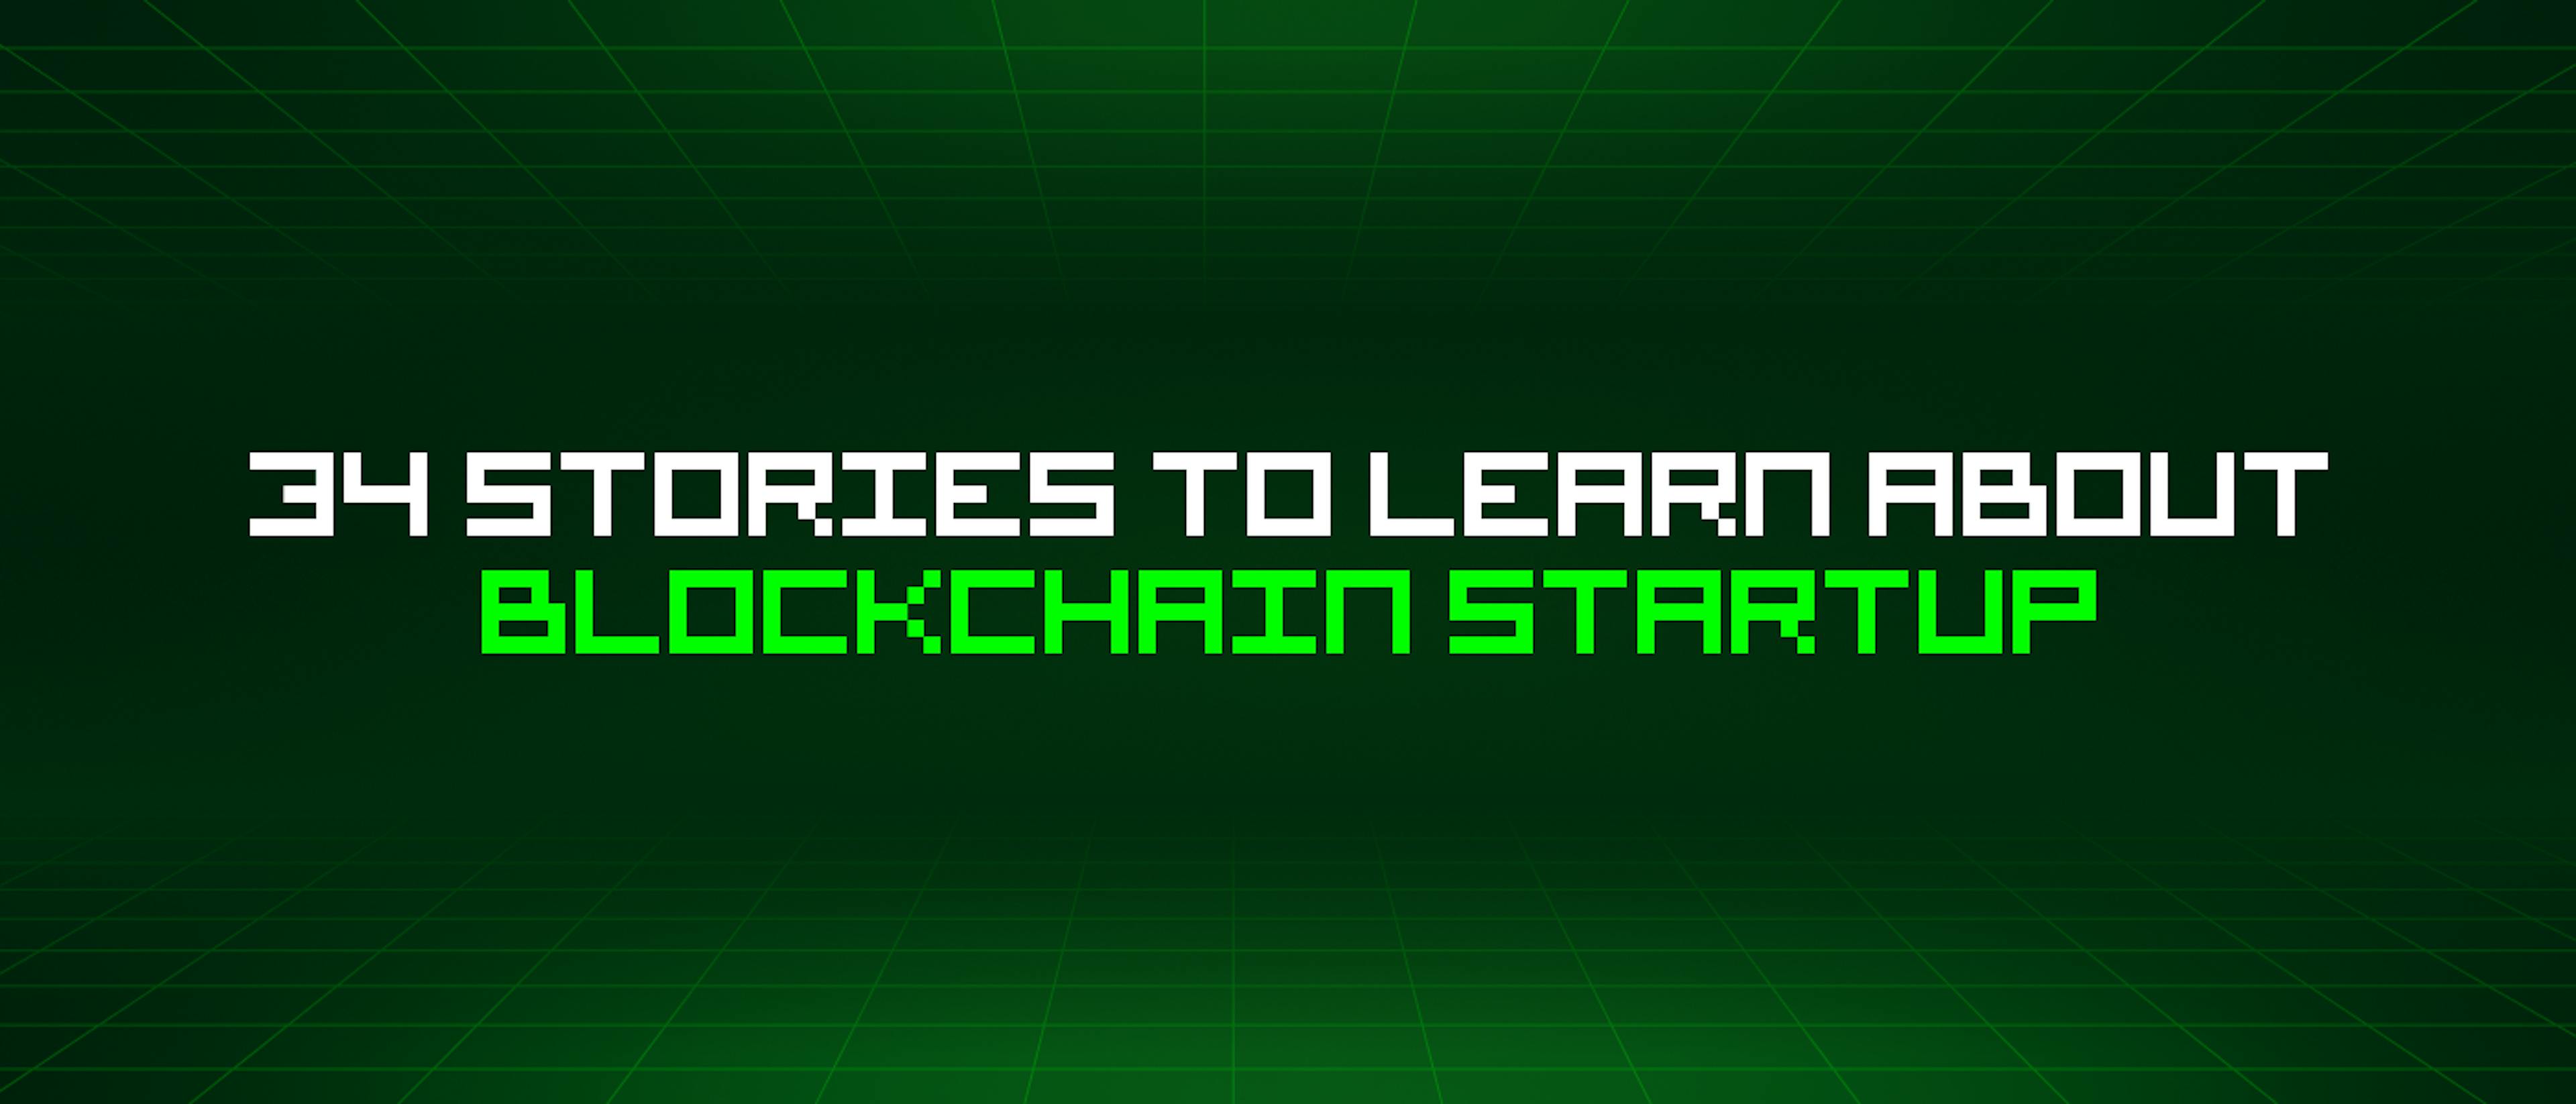 featured image - 34 Stories To Learn About Blockchain Startup